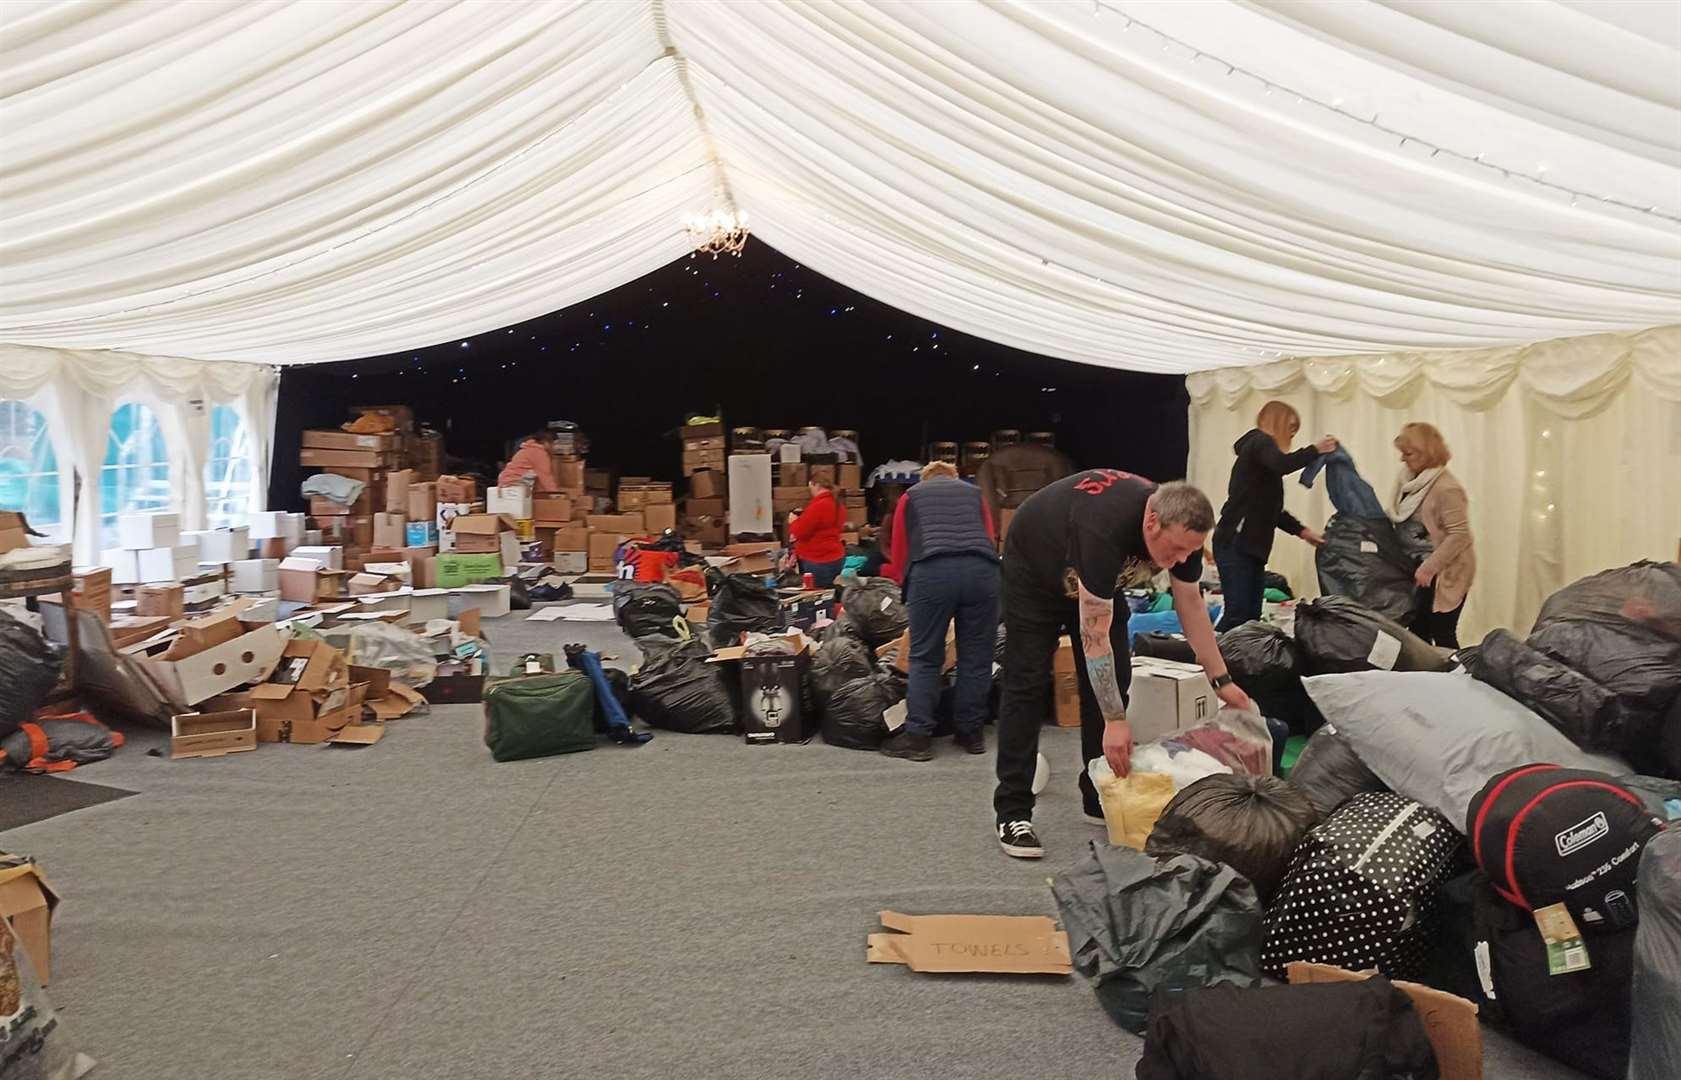 Some of the volunteers getting on with the task of sorting donations in the Stemster House marquee.